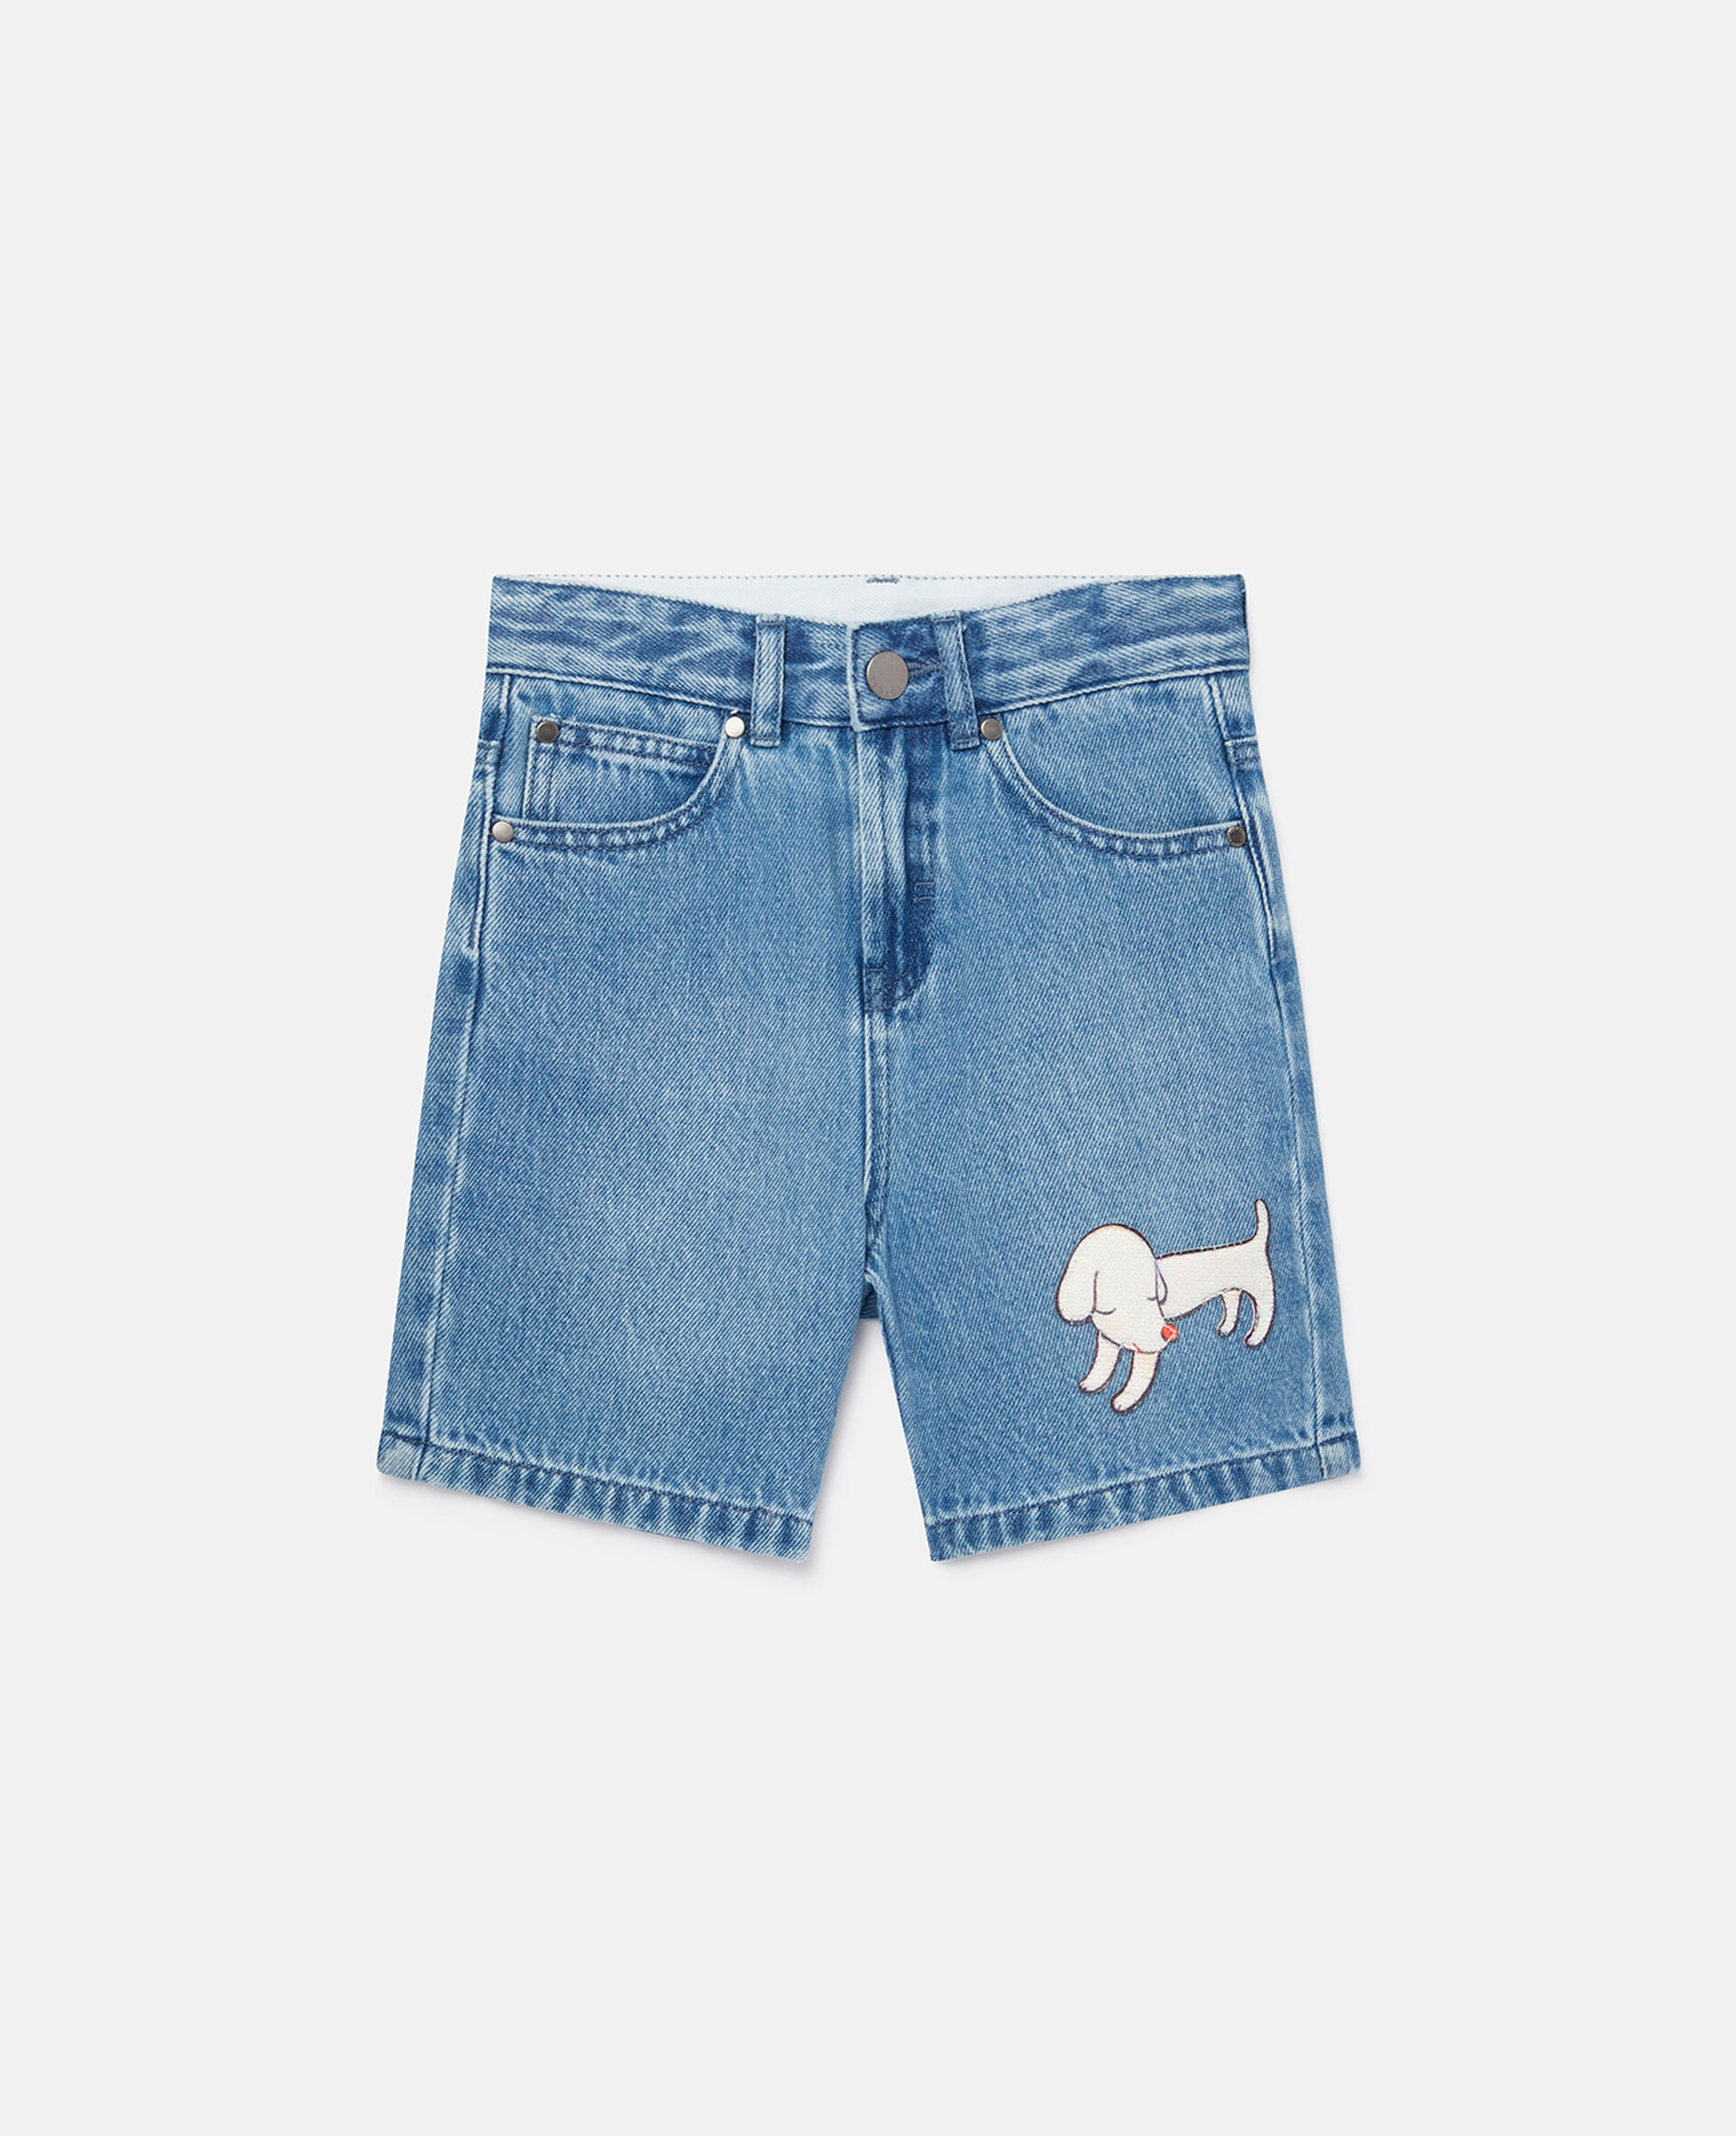 Lonesome Puppy Embroidery Denim Shorts-Blue-large image number 0